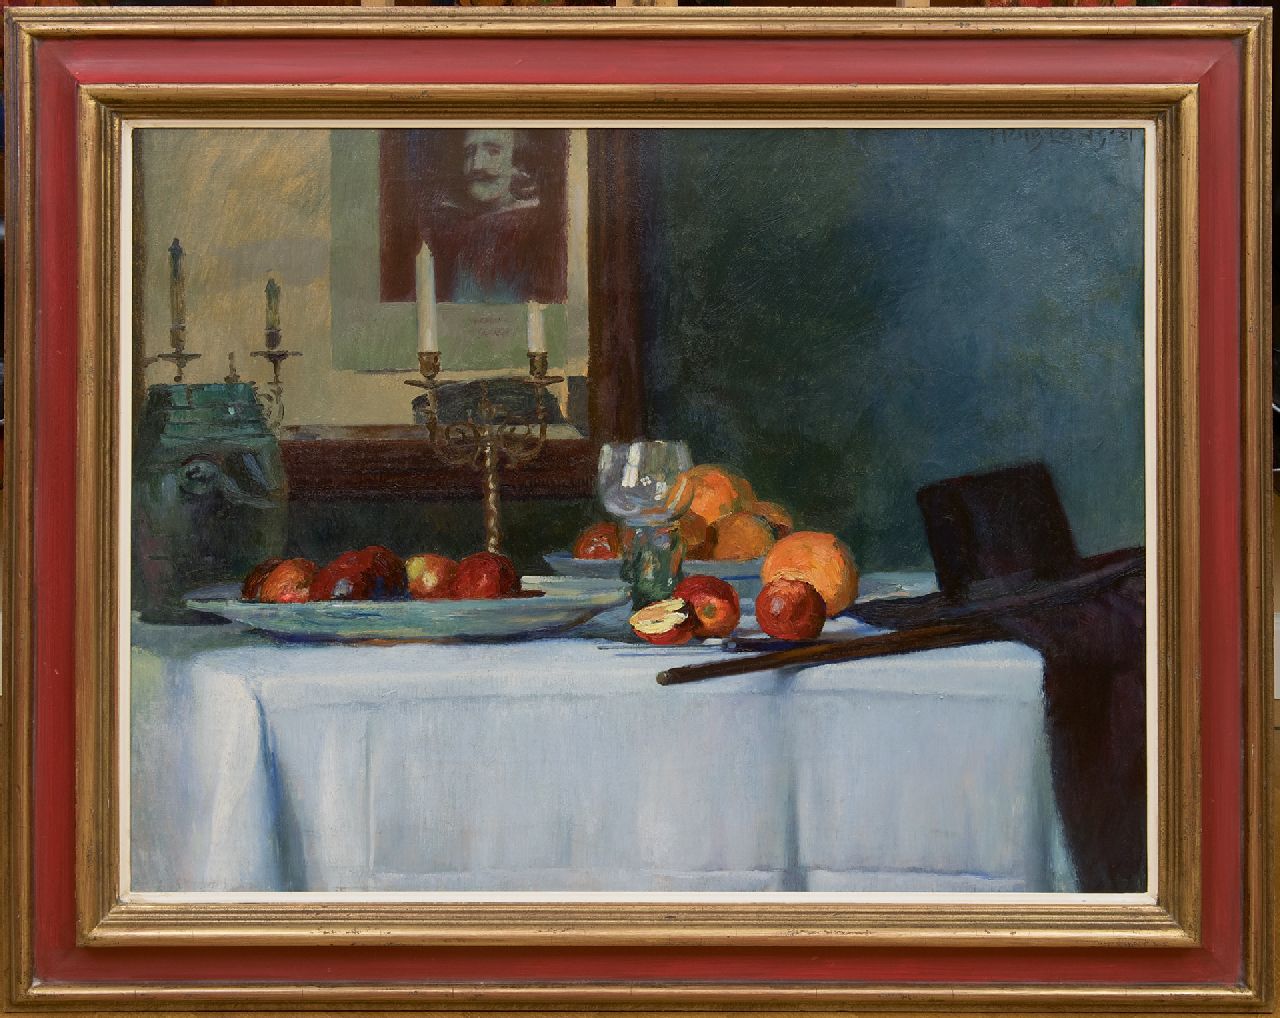 Luns H.M.  | Hubert Marie 'Huib' Luns, A still life with a roemer, fruit and ornamental candlesticks, oil on canvas 79.1 x 97.9 cm, signed u.r. and dated '31